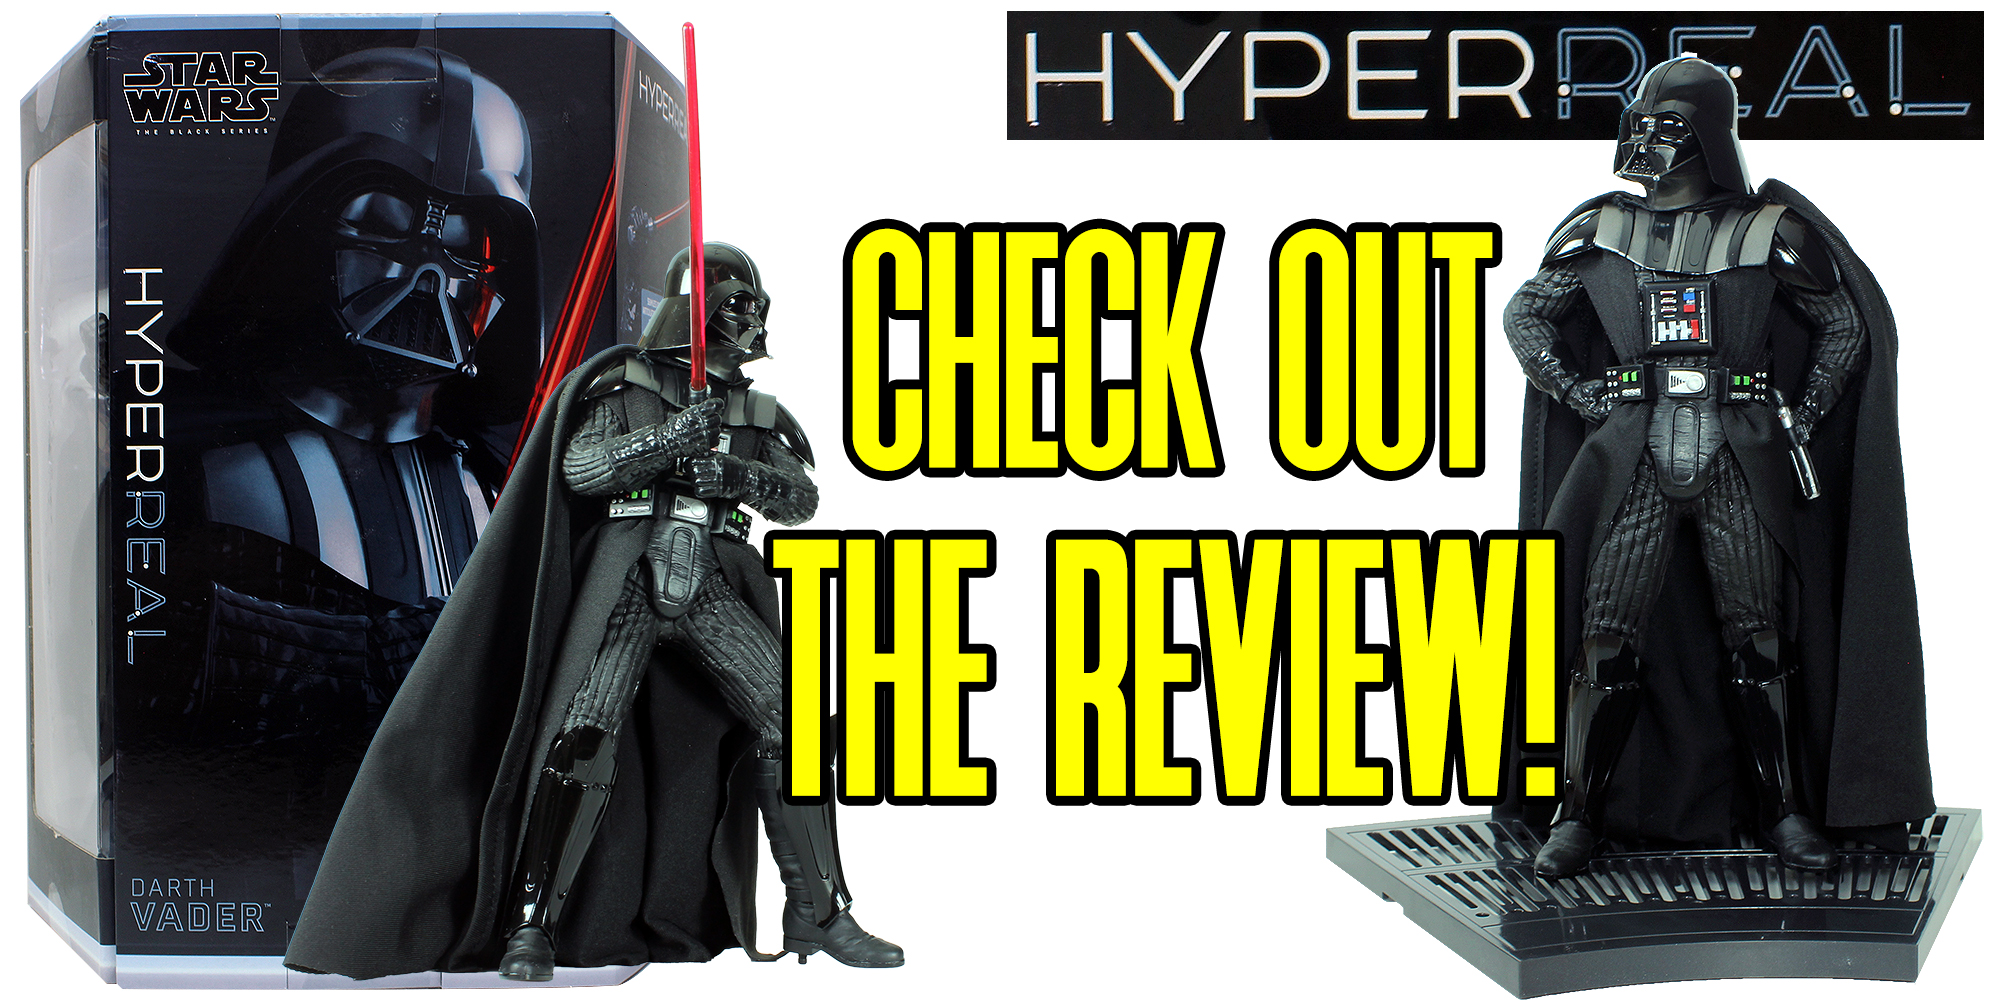 Check Out The HYPERREAL DARTH VADER review!